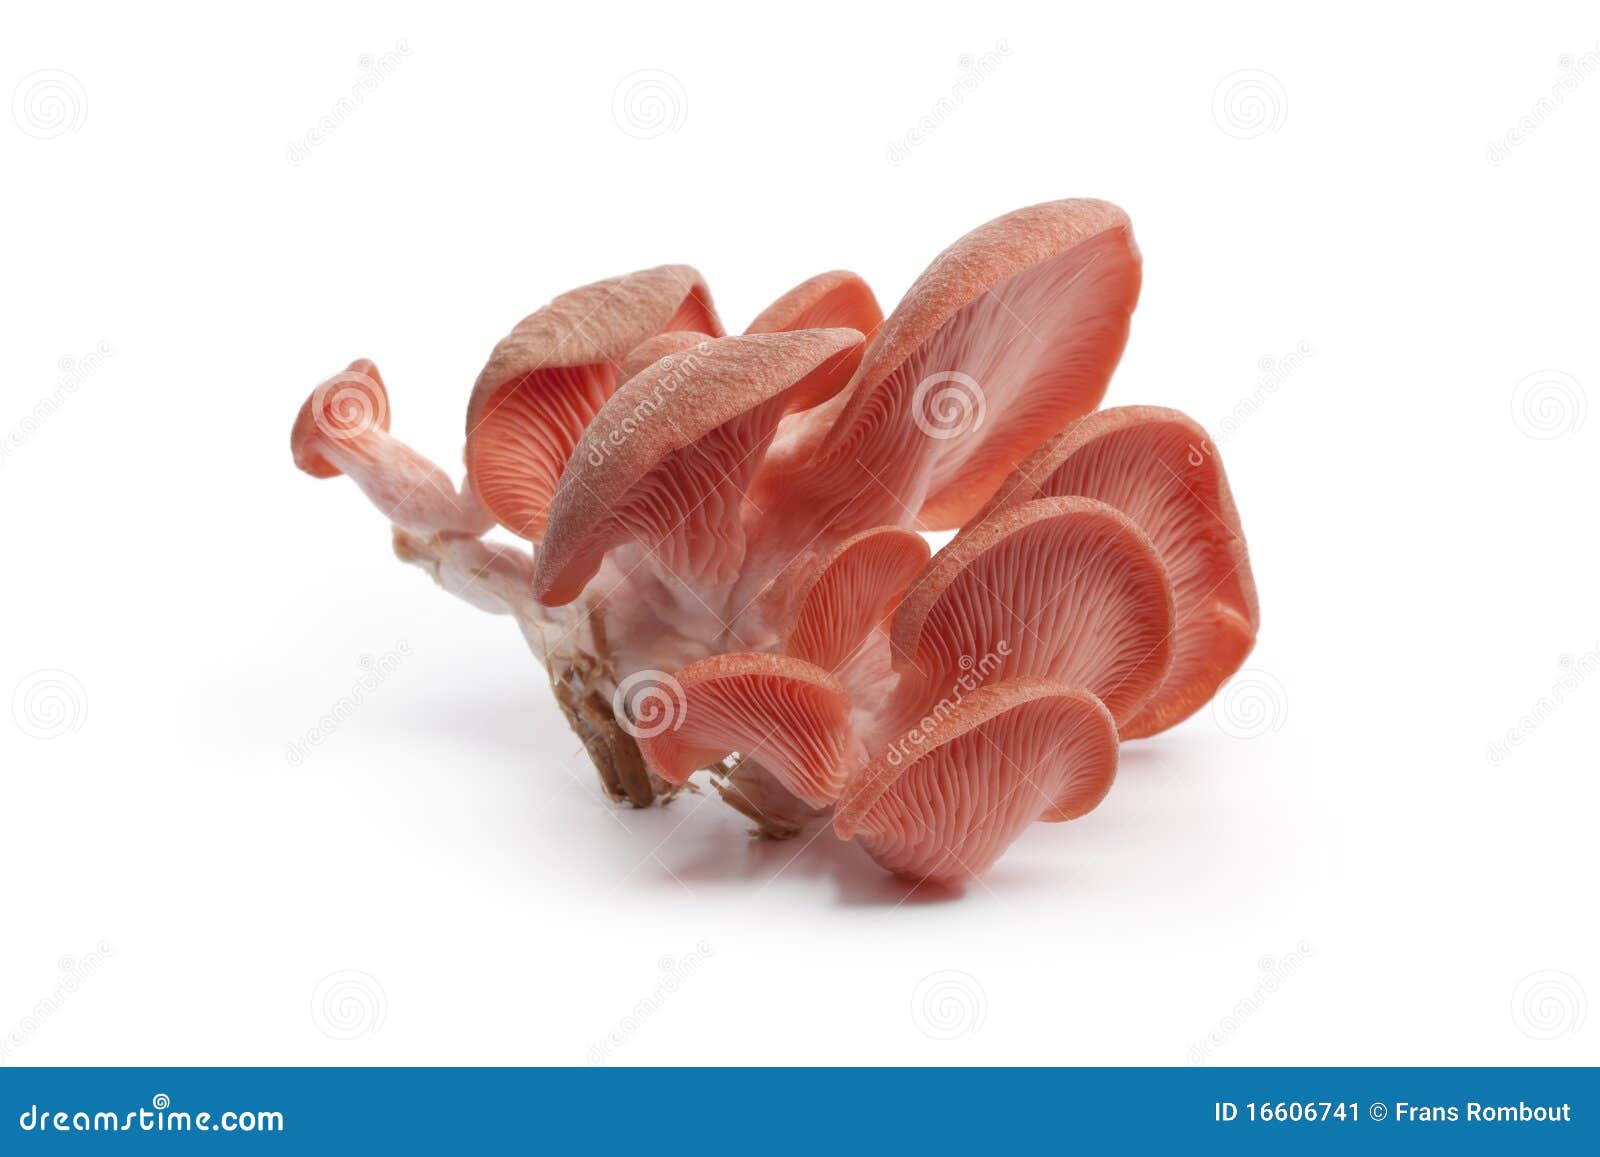 cluster of pink oyster mushrooms